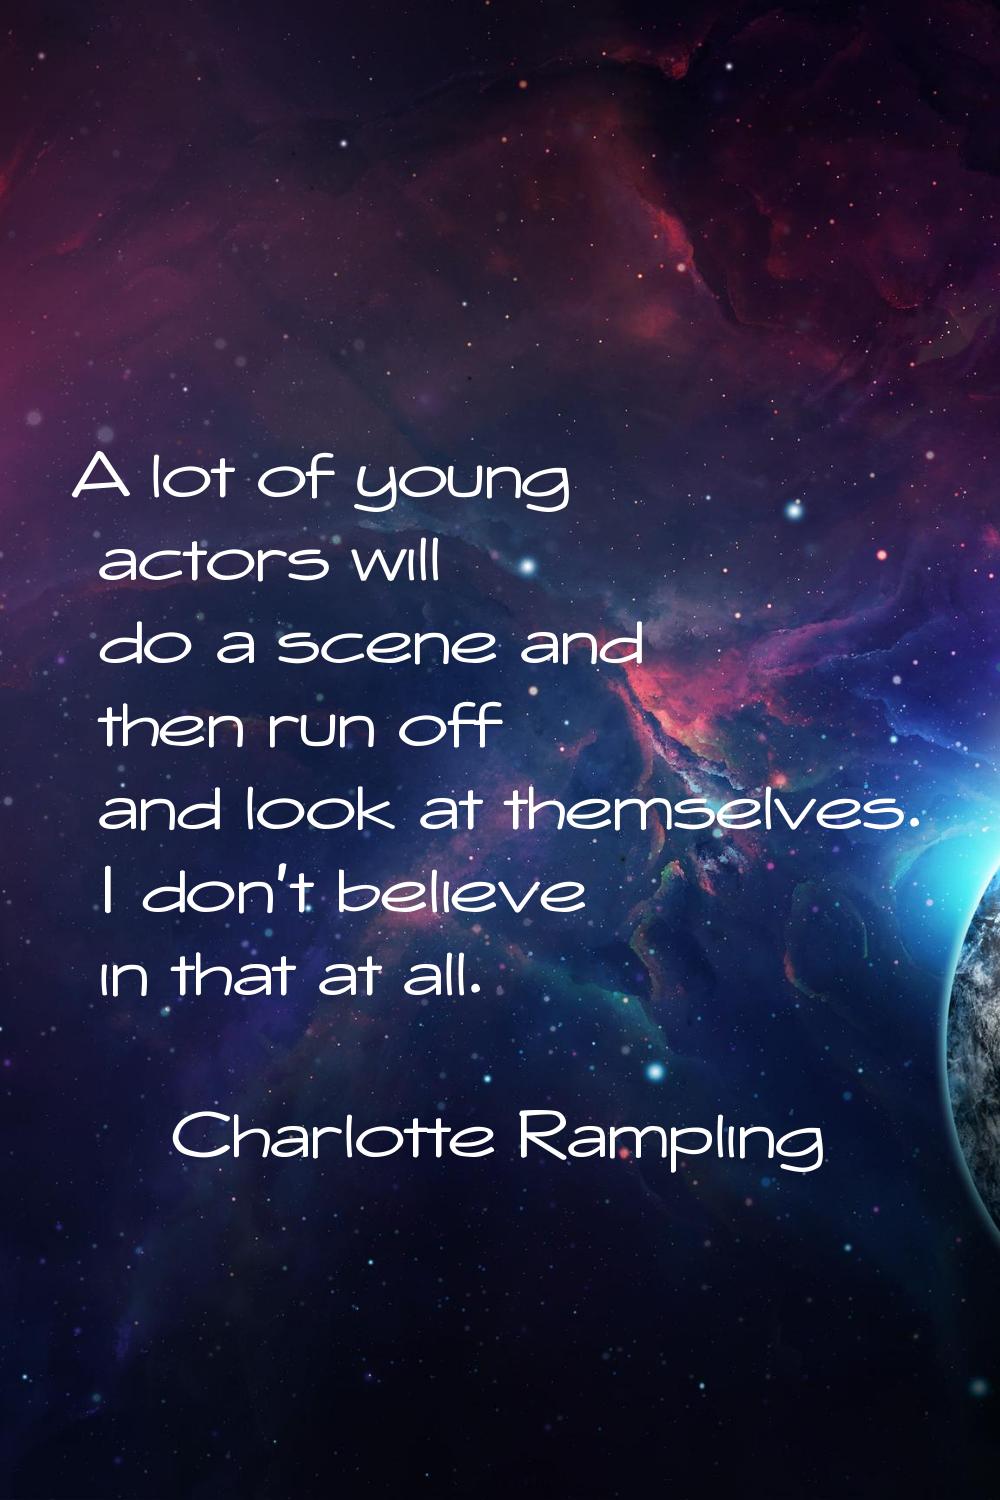 A lot of young actors will do a scene and then run off and look at themselves. I don't believe in t